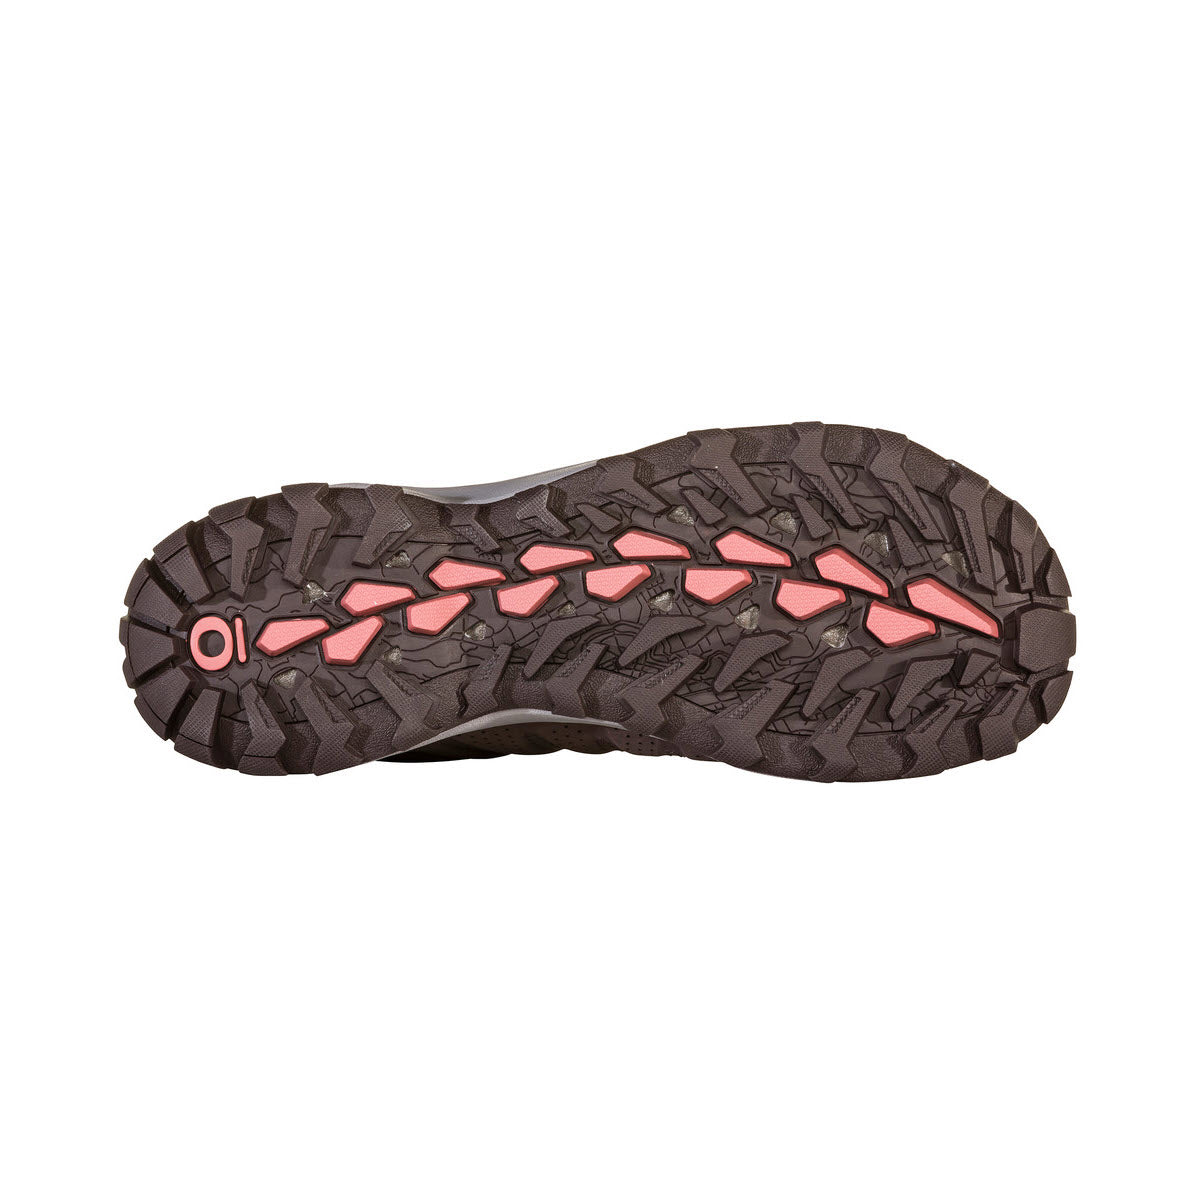 Sole of a hiking boot featuring Oboz Sypes Mid Leather B-Dry Peppercorn with dark gray treads and pink zigzag accents on a white background.